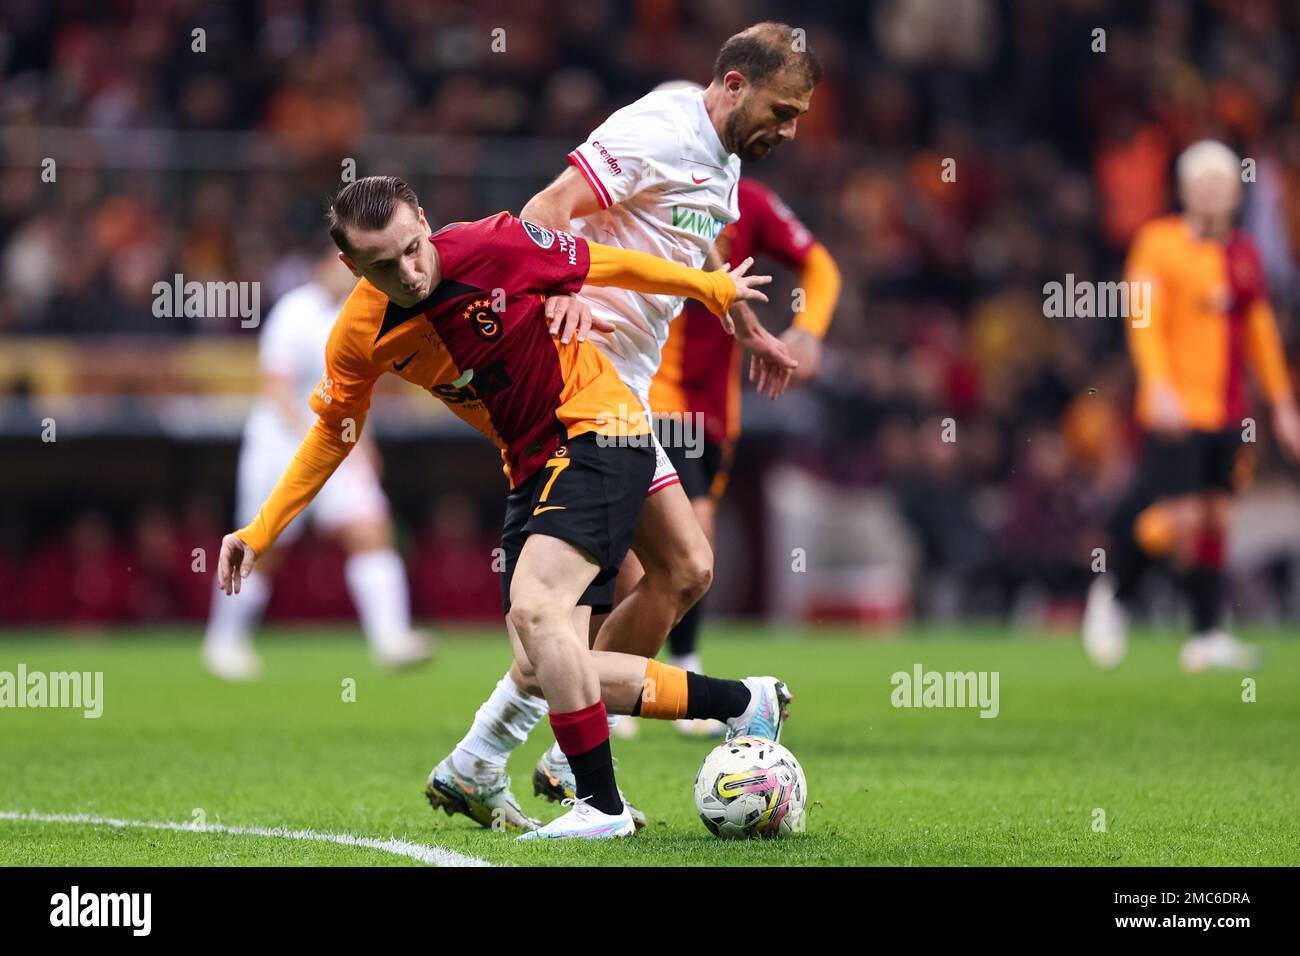 ISTANBUL, TURKEY - JANUARY 21: Kerem Akturkoglu of Galatasaray SK and Admir Mehmedi of Antalyaspor battle for possession during the Super Lig match between Galatasaray SK and Antalyaspor at the NEF Stadium on January 21, 2023 in Istanbul, Turkey (Photo by Orange Pictures) Stock Photo